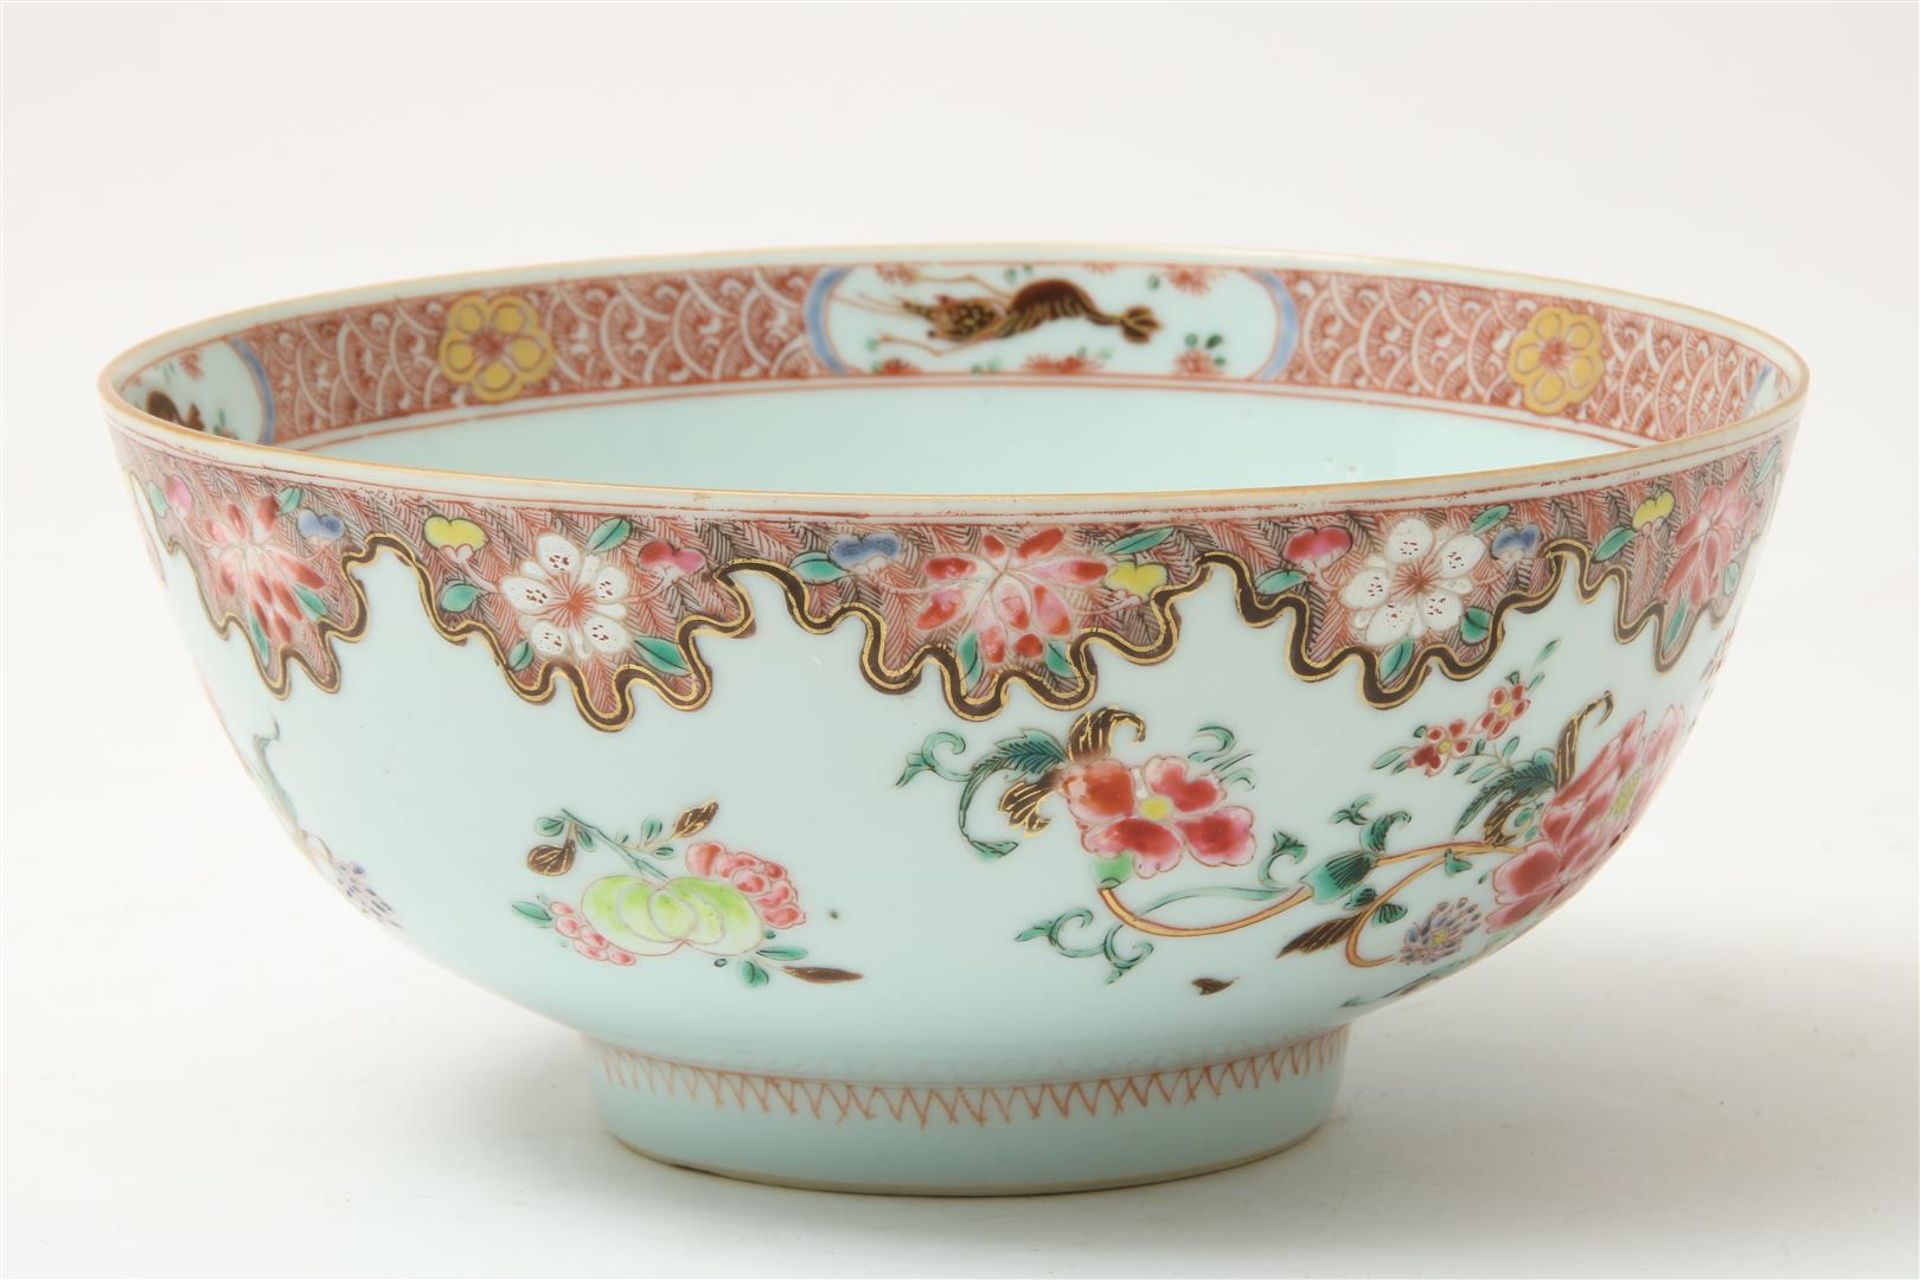 Porcelain Famille-Rose bowl decorated with gold, the interior with flower decoration under the rim